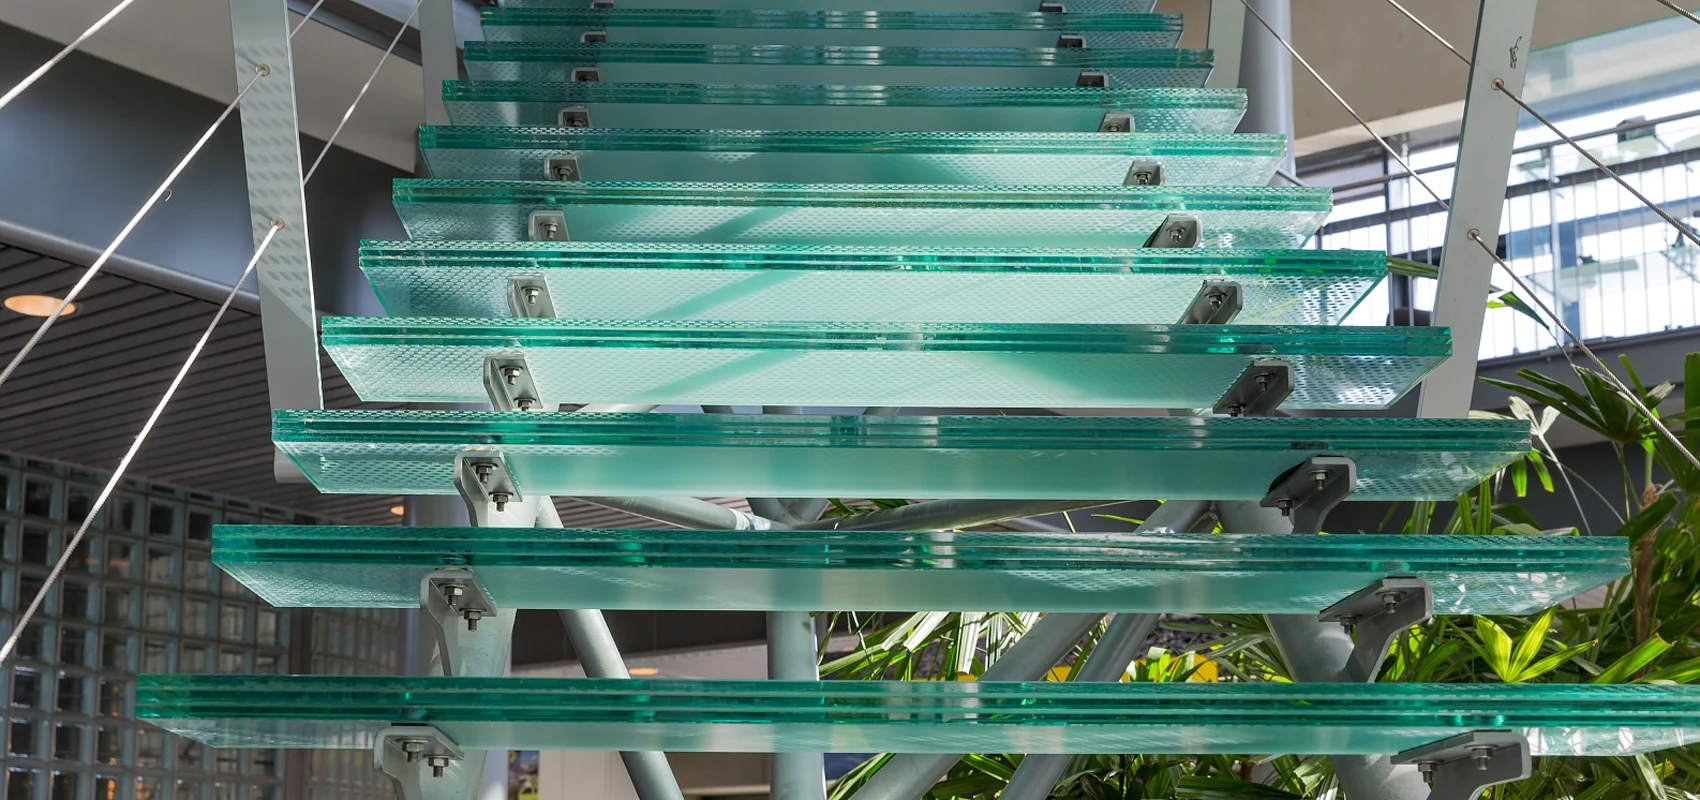 What are the advantages and disadvantages of laminated glass?